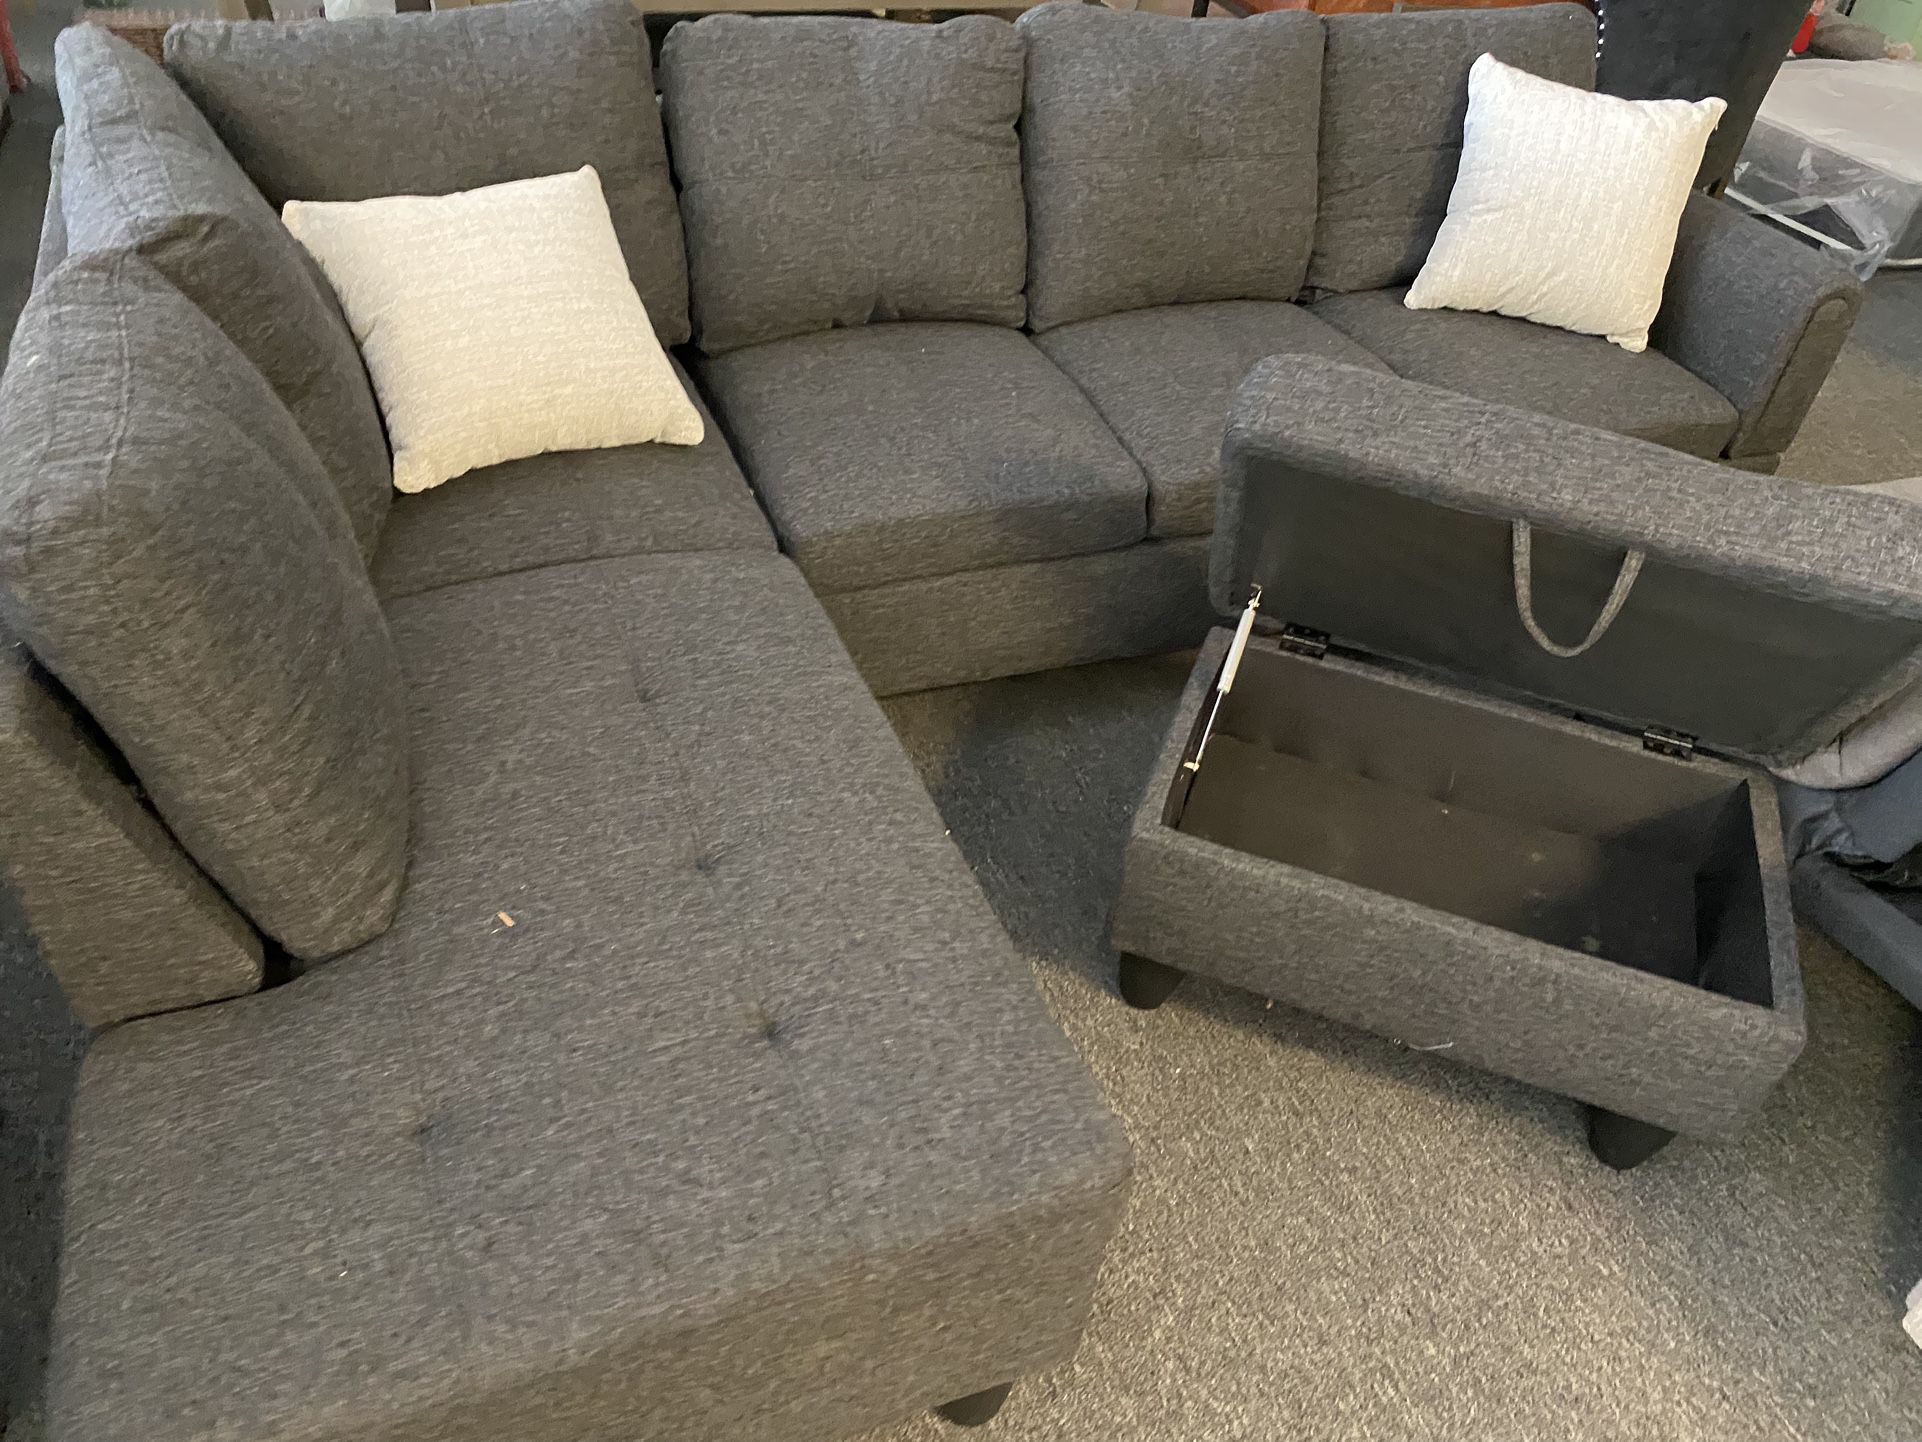 Fall Sale Starts Now! $399 Grey NEW Complete Sectional! Reversible  NEW Clearance Til Gone 3 Left  IN STOCK! NO WAIT